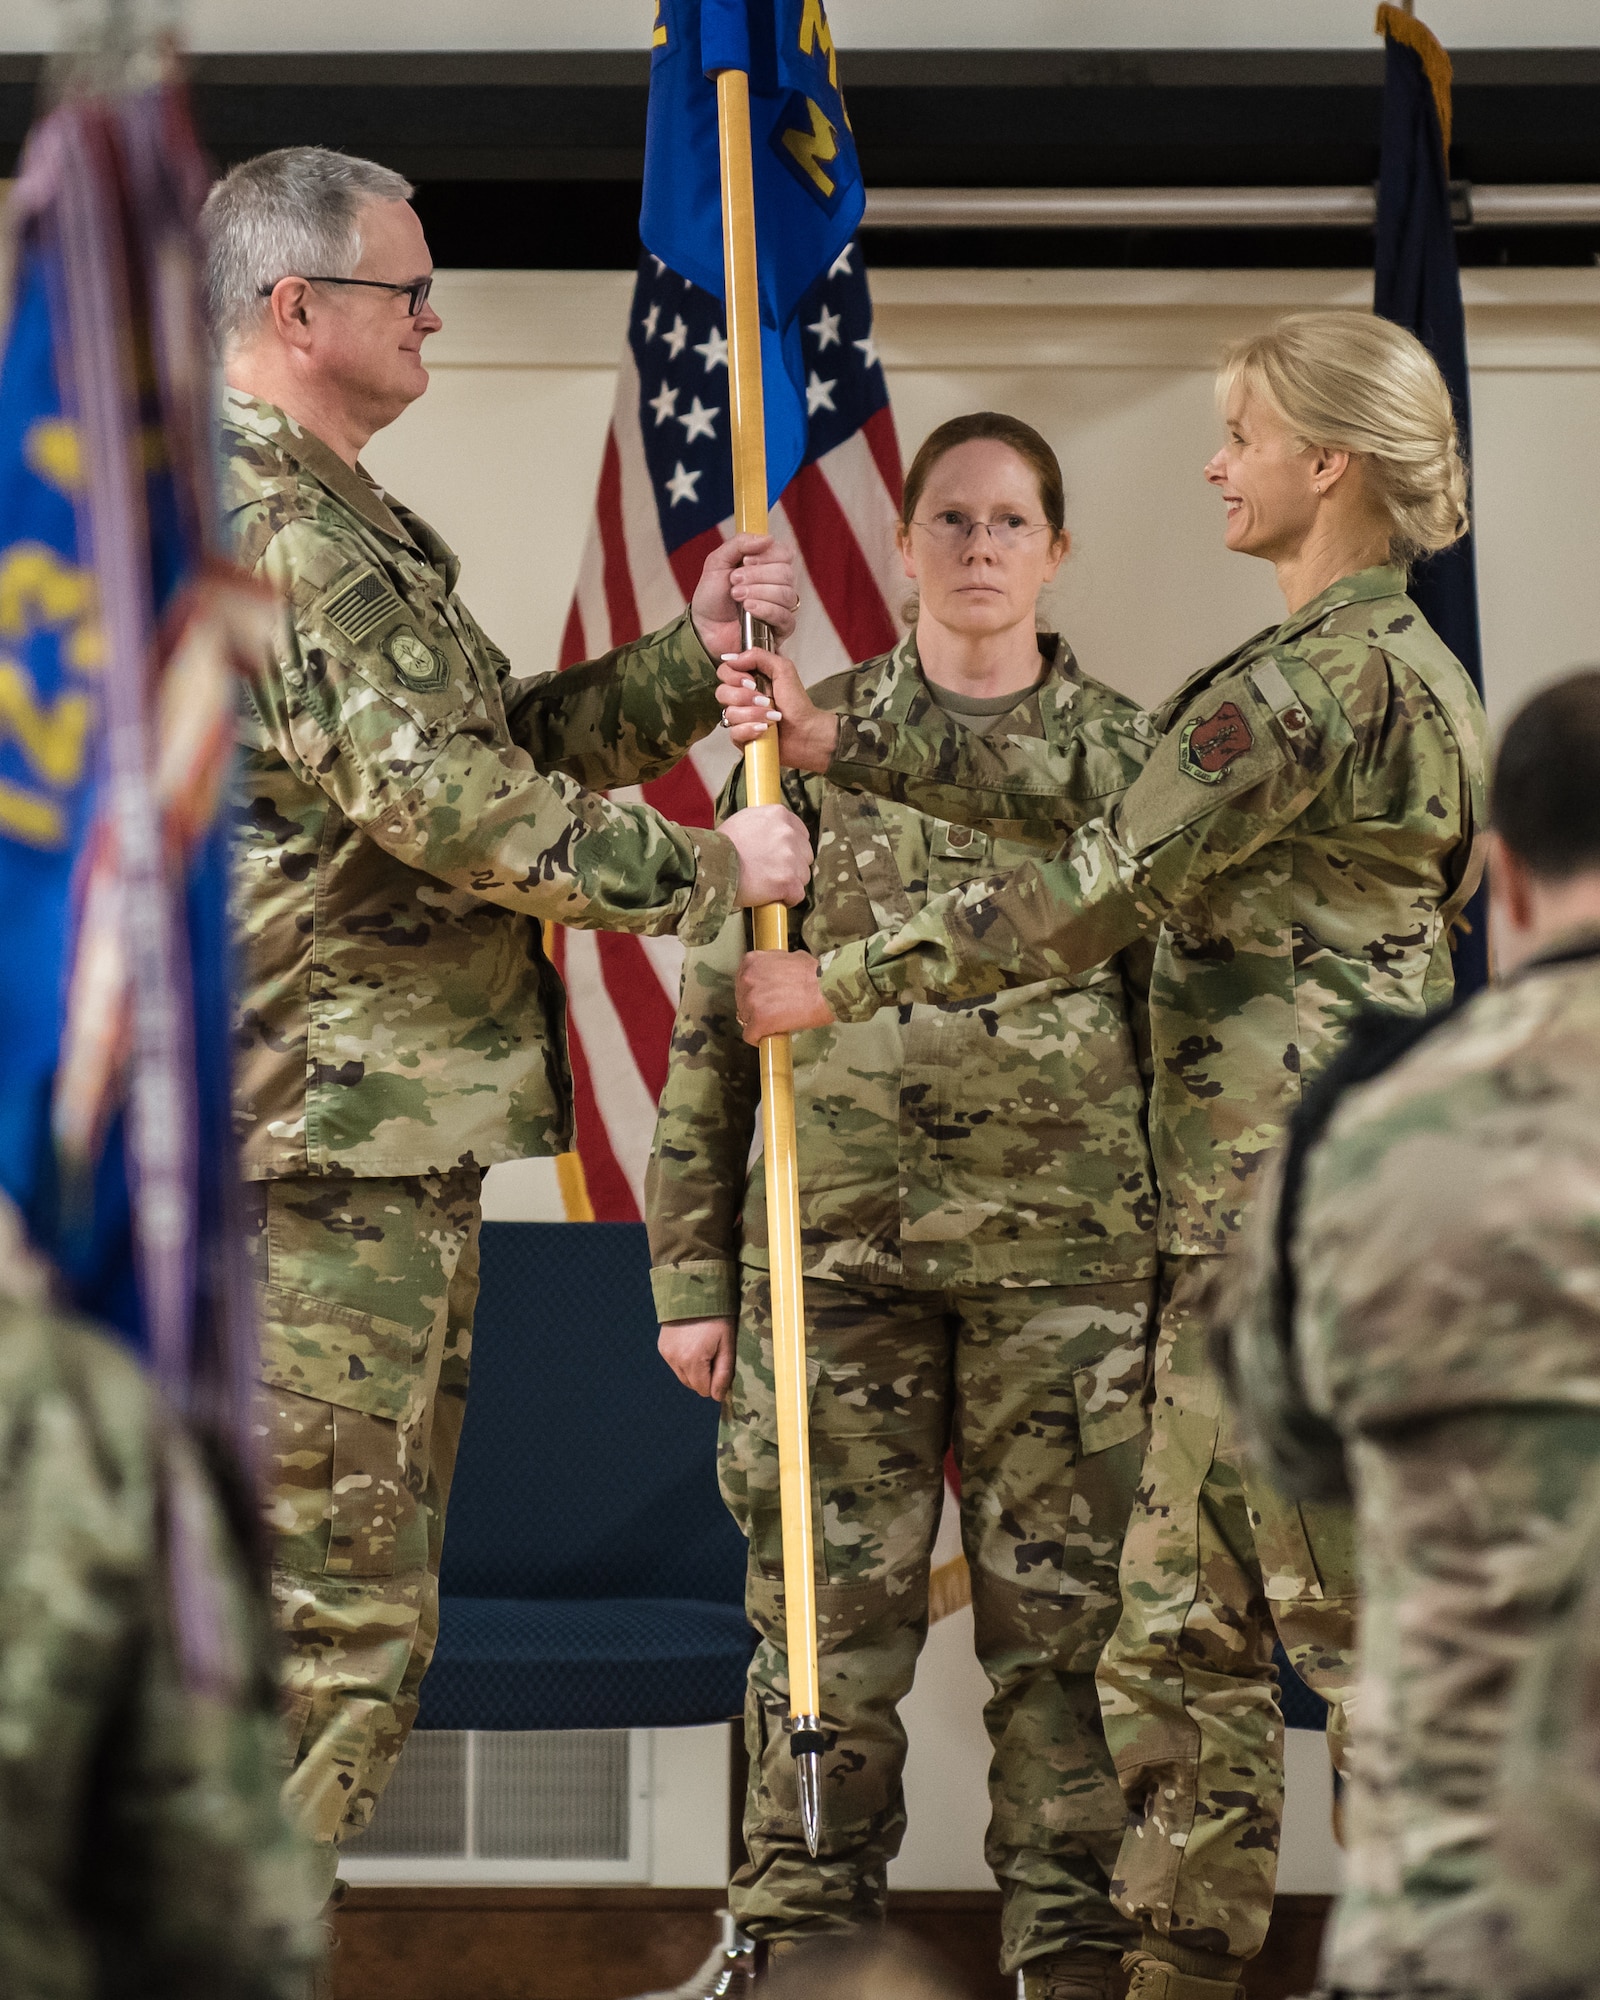 Col. Mary Decker accepts the 123rd Mission Support Group guidon from Col. David Mounkes, commander of the 123rd Airlift Wing, as she assumes command of the group during a ceremony at the Kentucky Air National Guard Base in Louisville, Ky., Jan. 5, 2019. Decker replaces Col. Patrick Pritchard, who has been named vice commander of the 123rd Airlift Wing. (U.S. Air National Guard photo by Dale Greer)